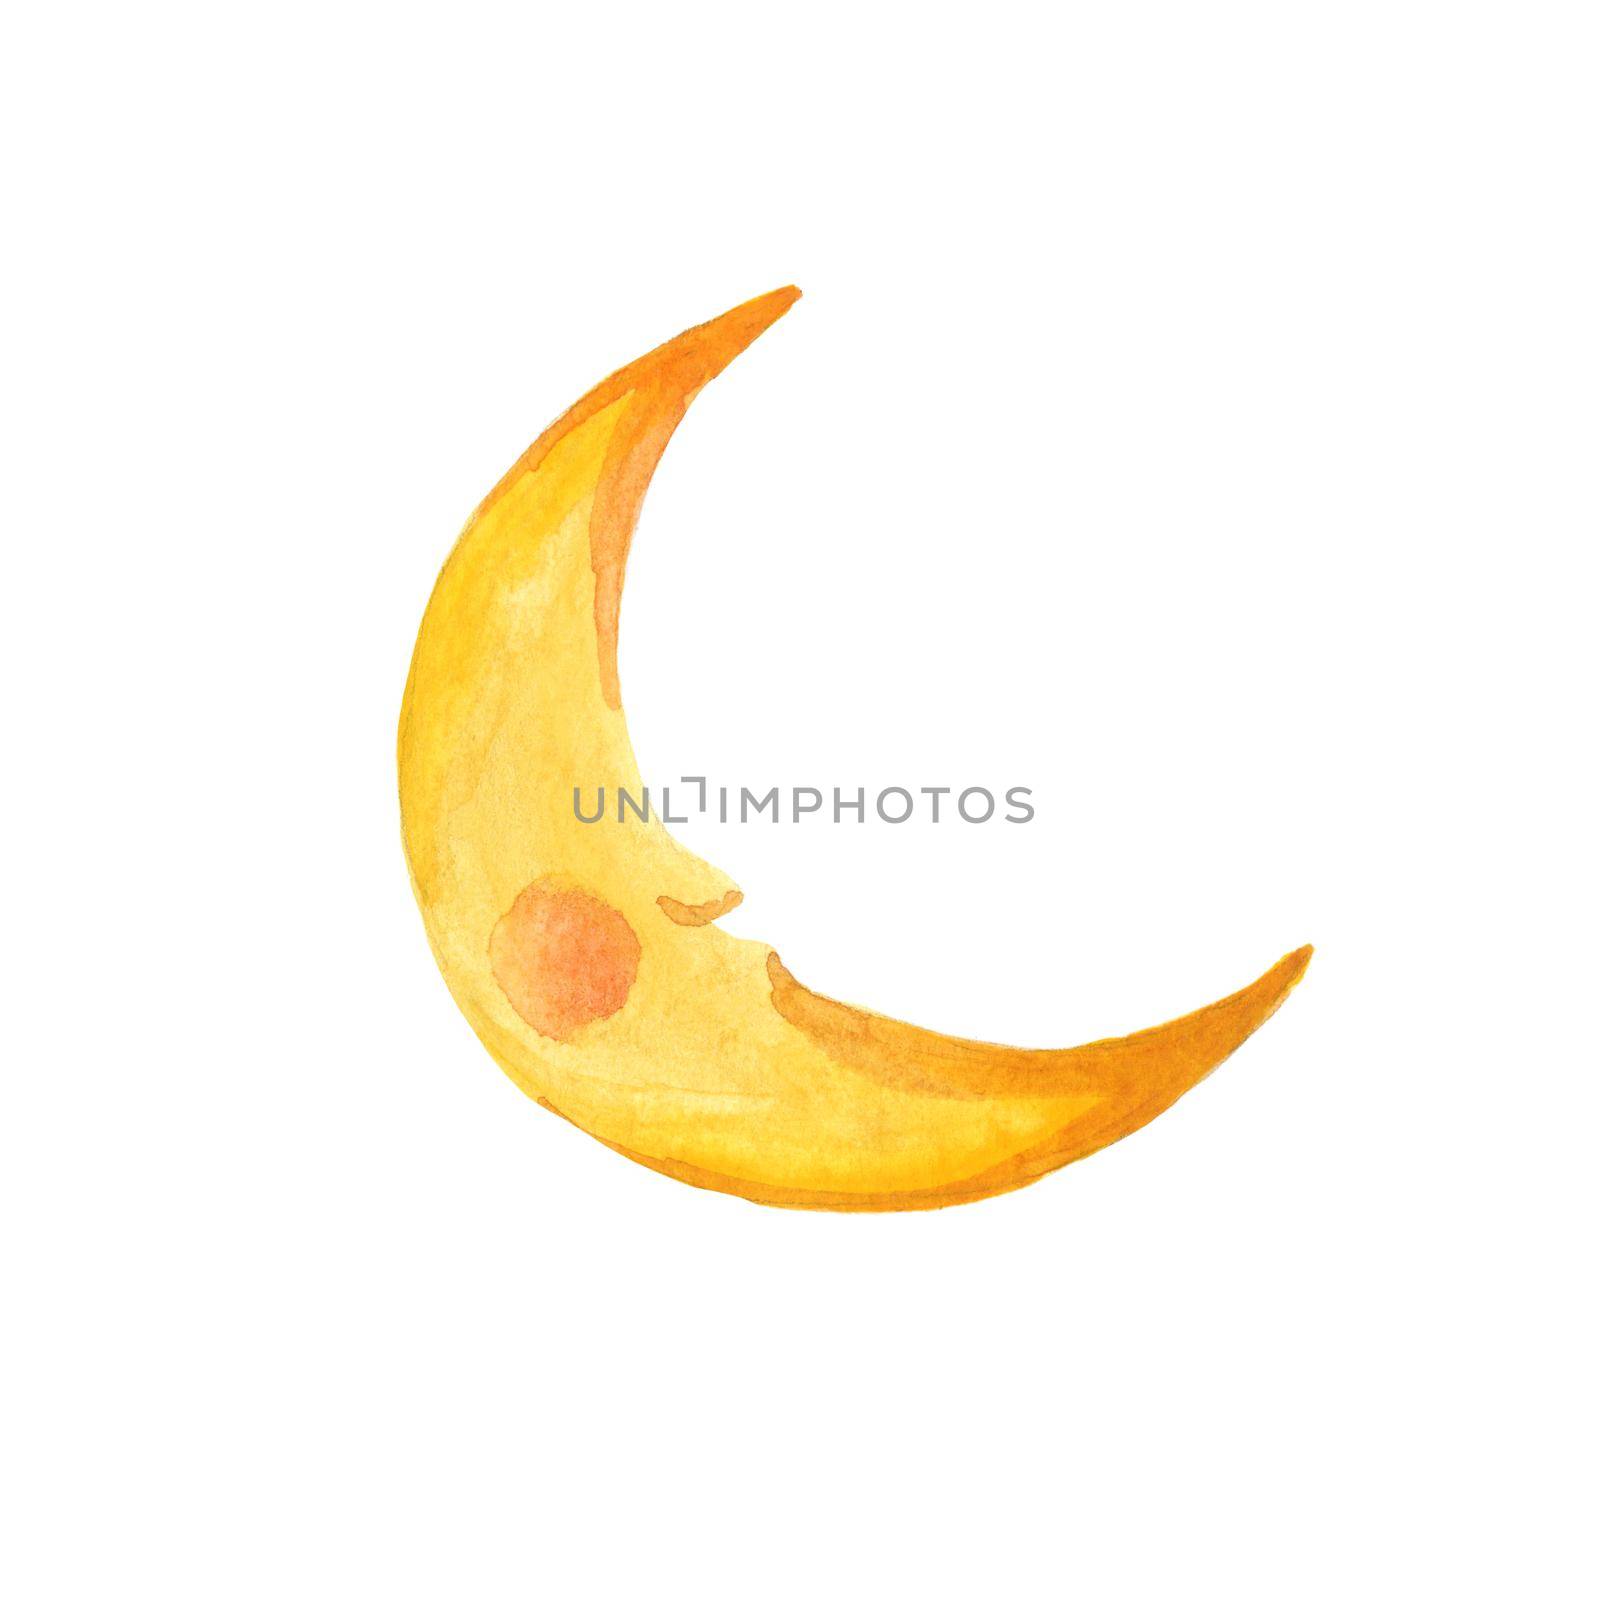 Crescent moon of painting with watercolor on paper, illustration design. isolated on white